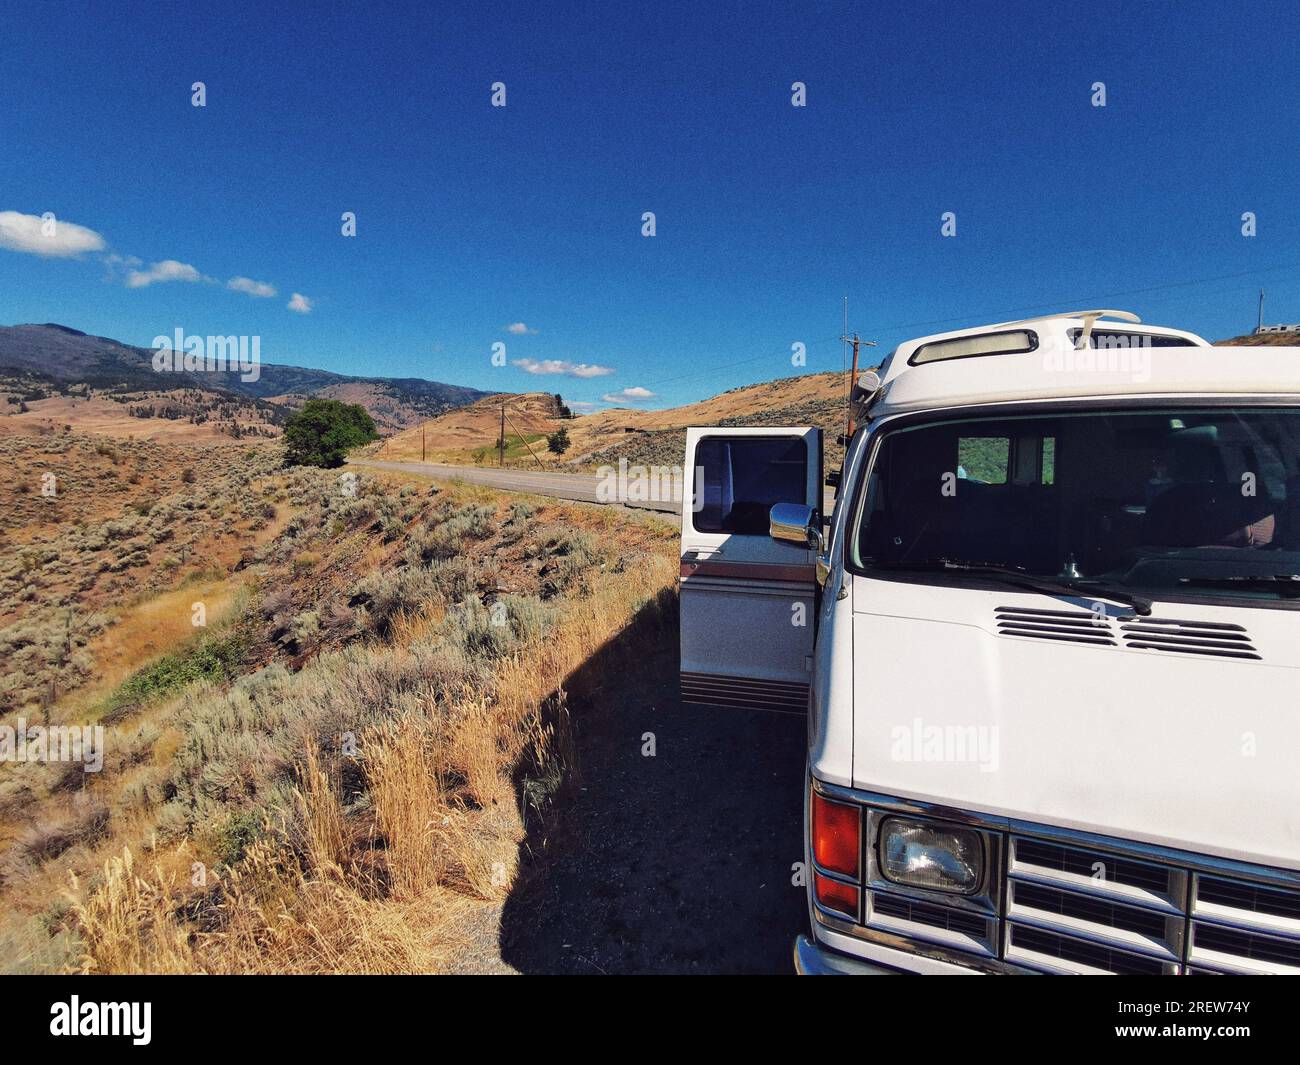 A parked camper van vehicle on a side of the road near Spotted Lake, located on Crowsnest HWY, Osoyoos British Columbia. Summer road trip journey in C Stock Photo